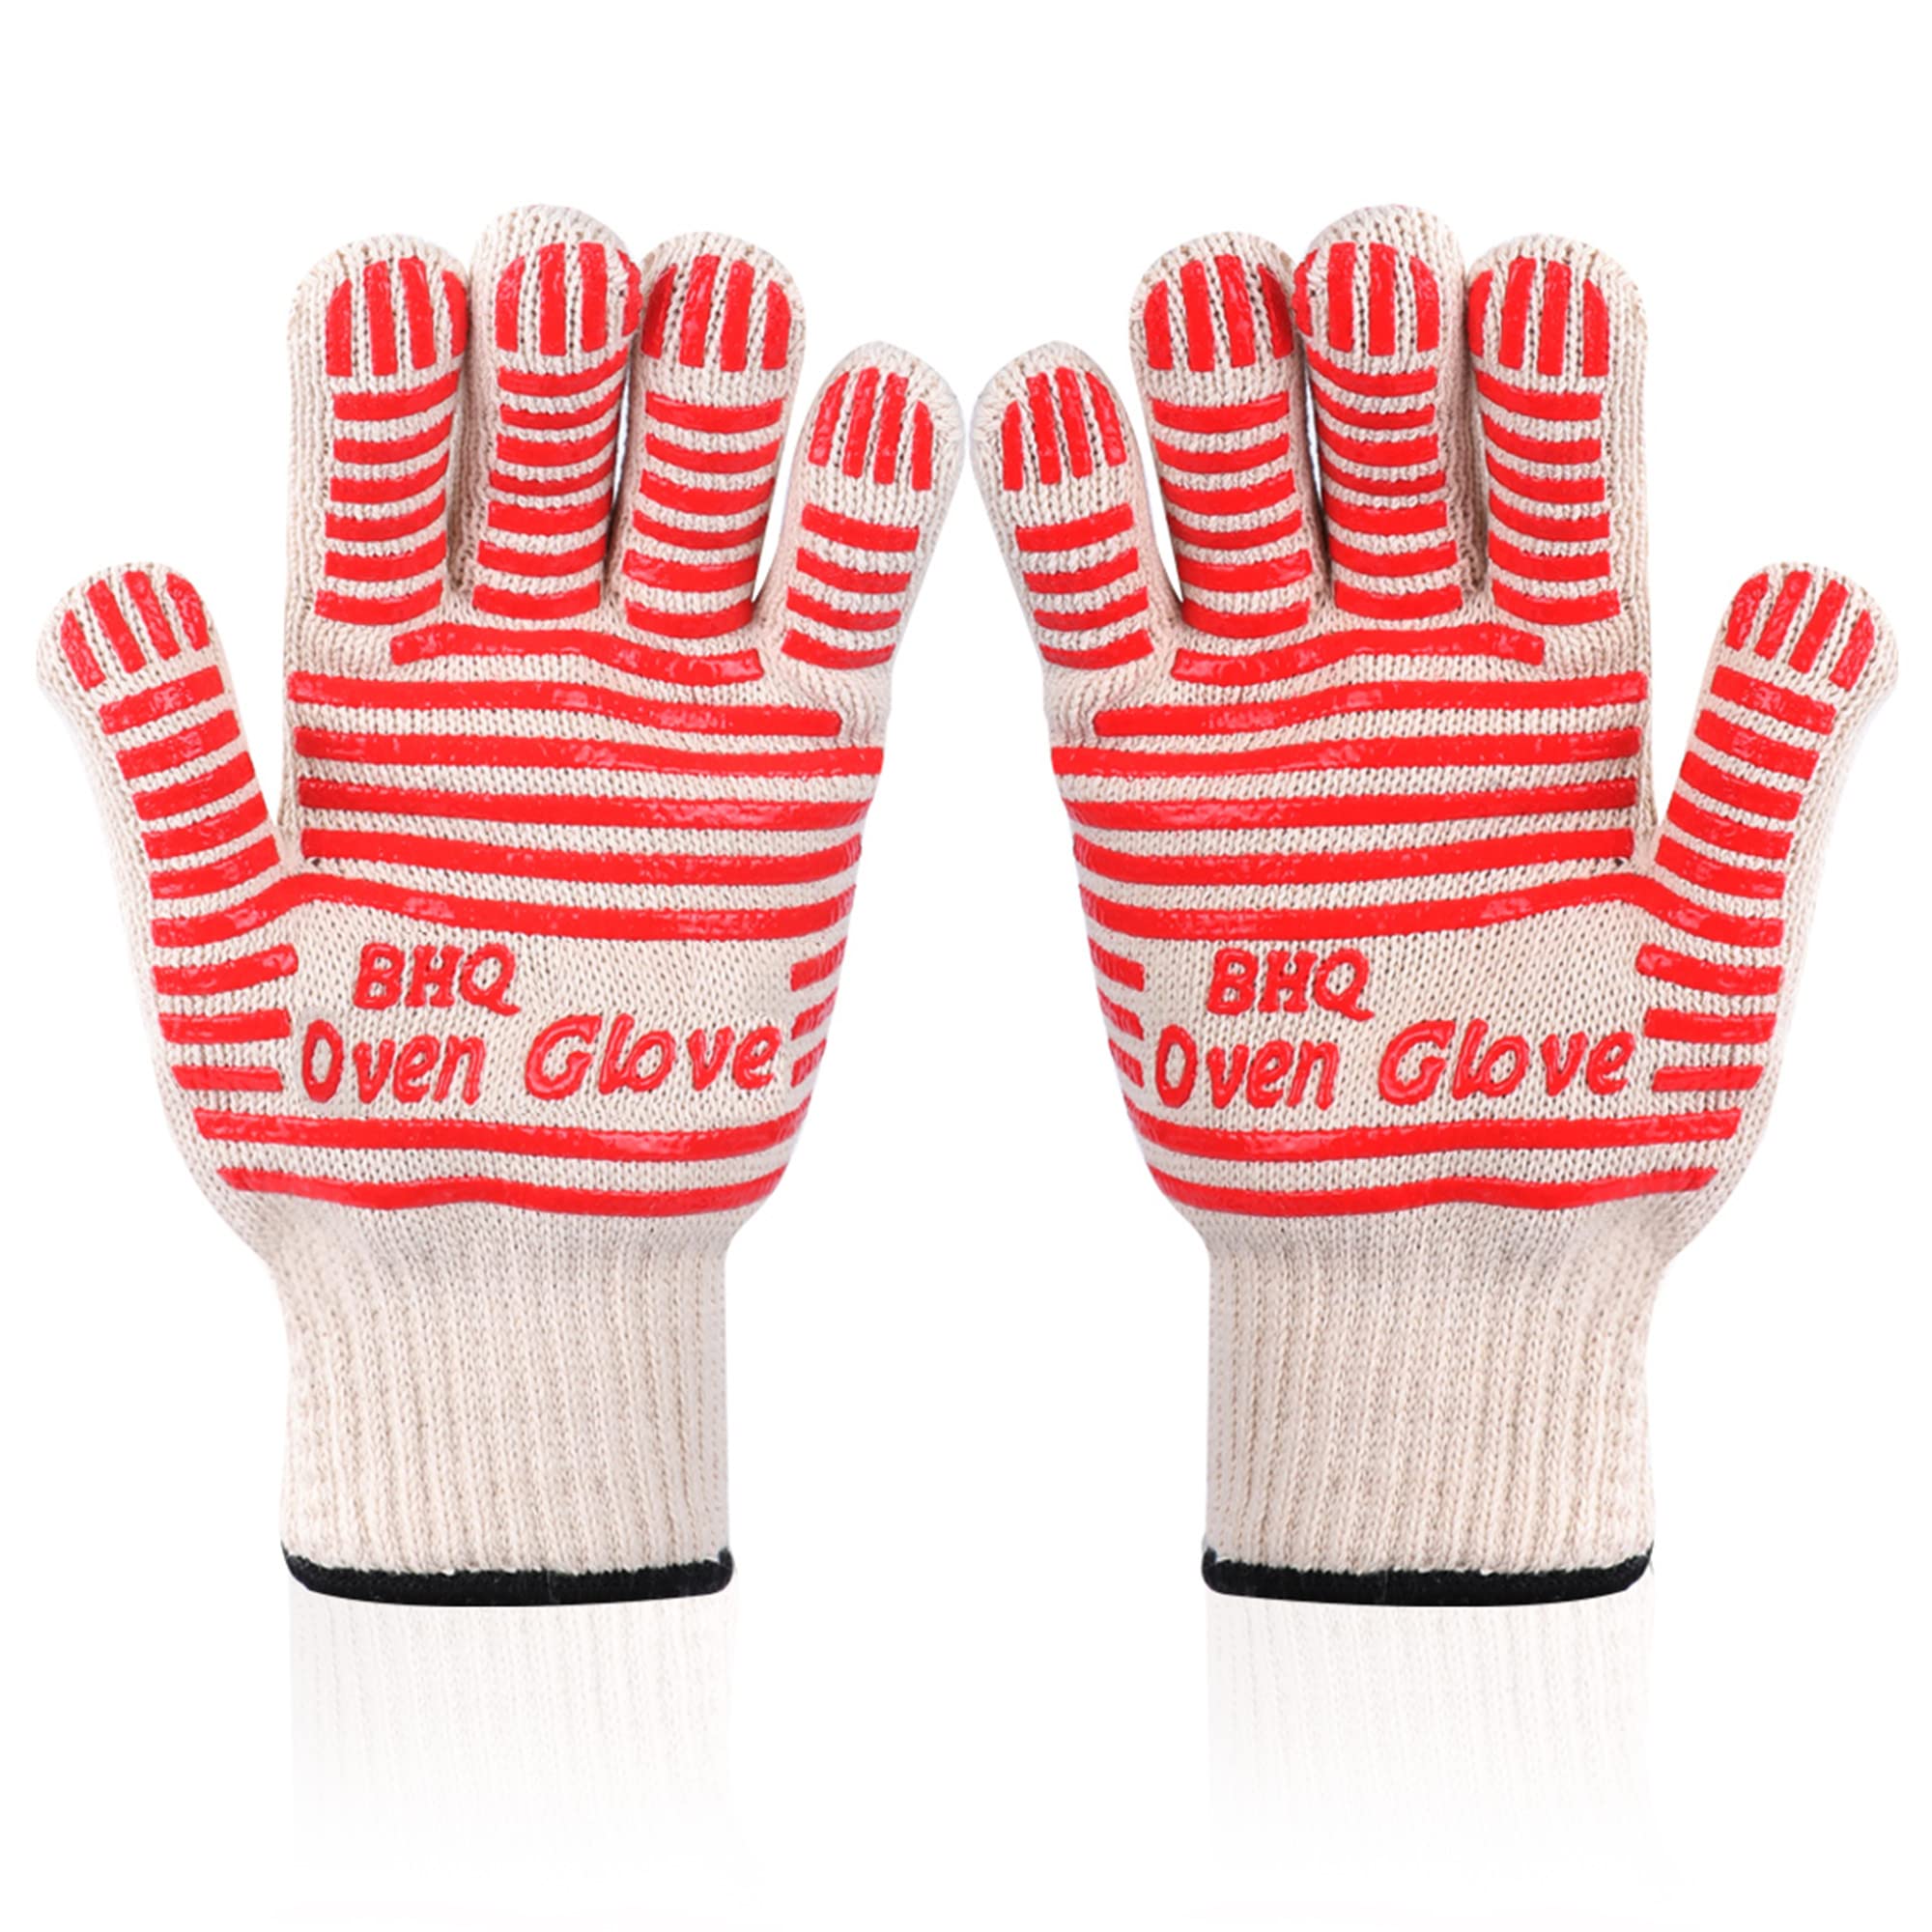 Czsyzczs Oven Gloves Grill Gloves Extreme Heat Resistant Oven Gloves - En407 Certified 932F - Cooking Gloves For Bbq, Grilling, 